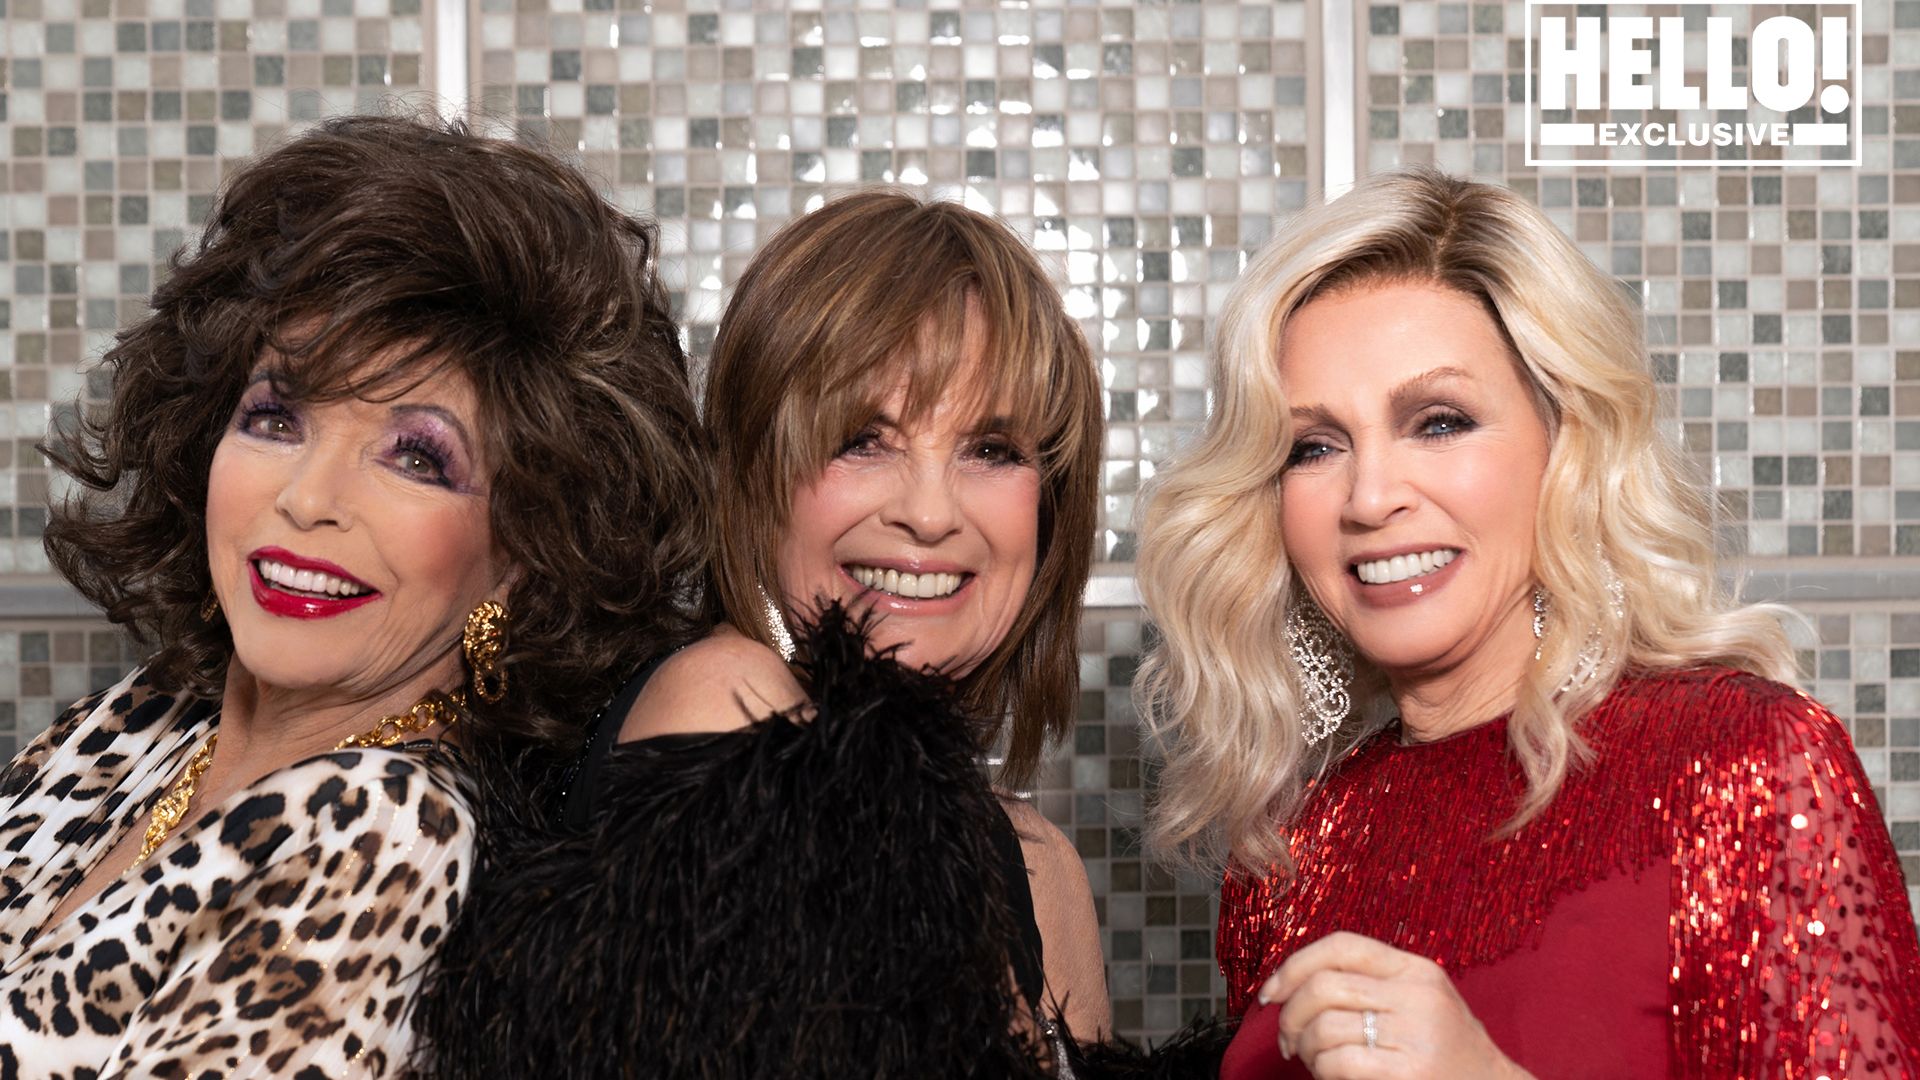 Clad in leopard print, Joan Collins poses for photos with Linda Gray and Donna Mills